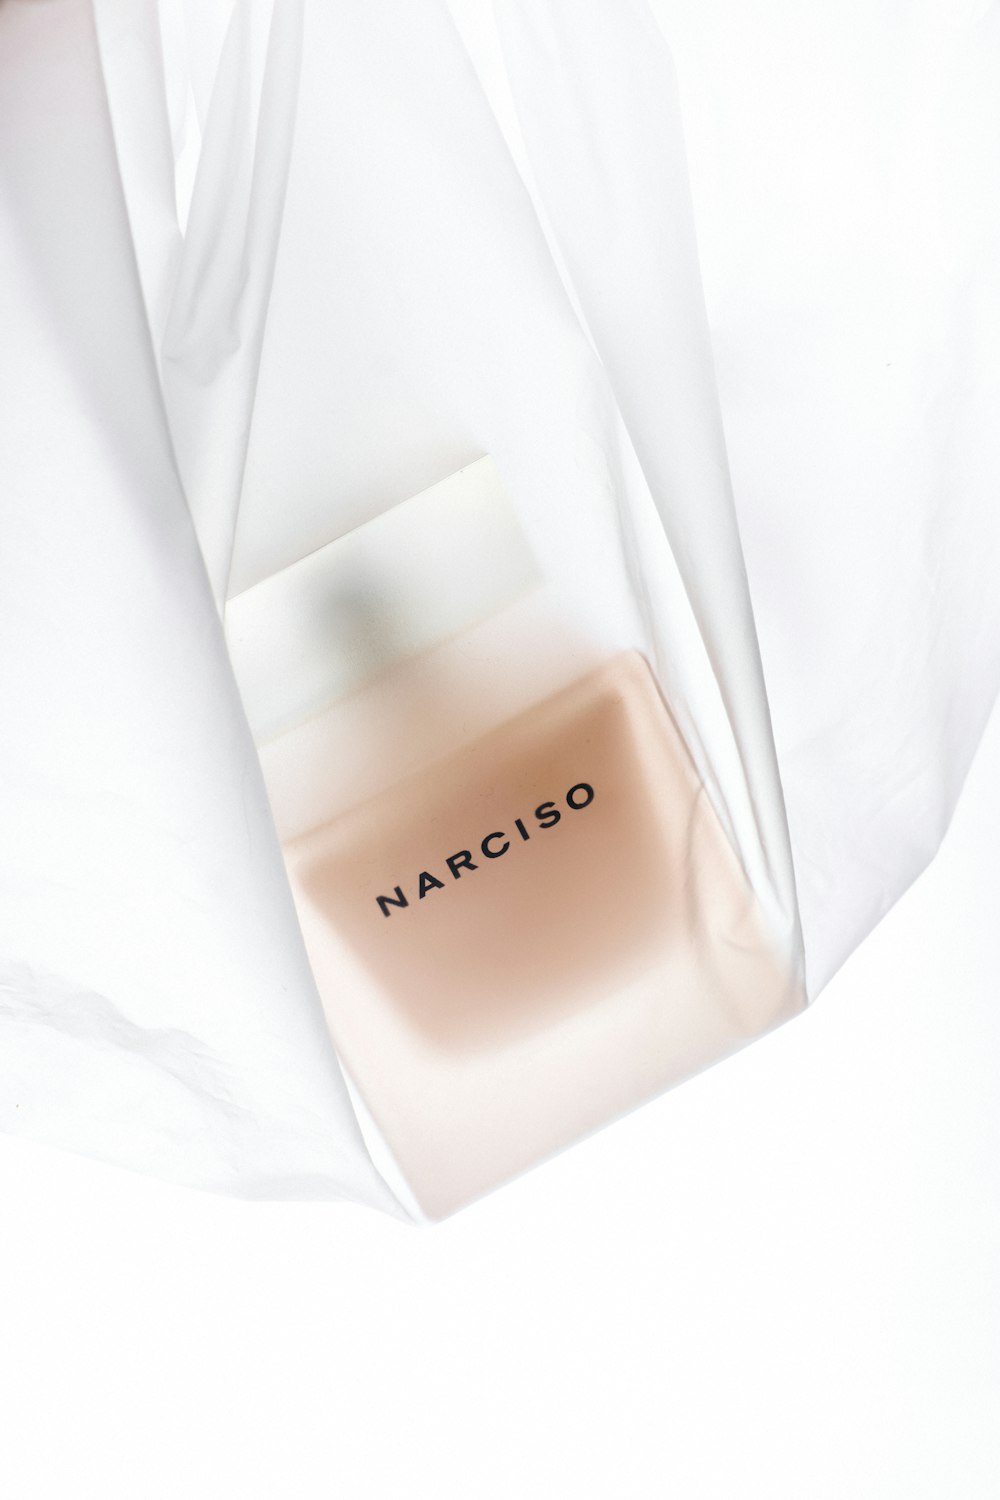 a bottle of narciso on a white sheet